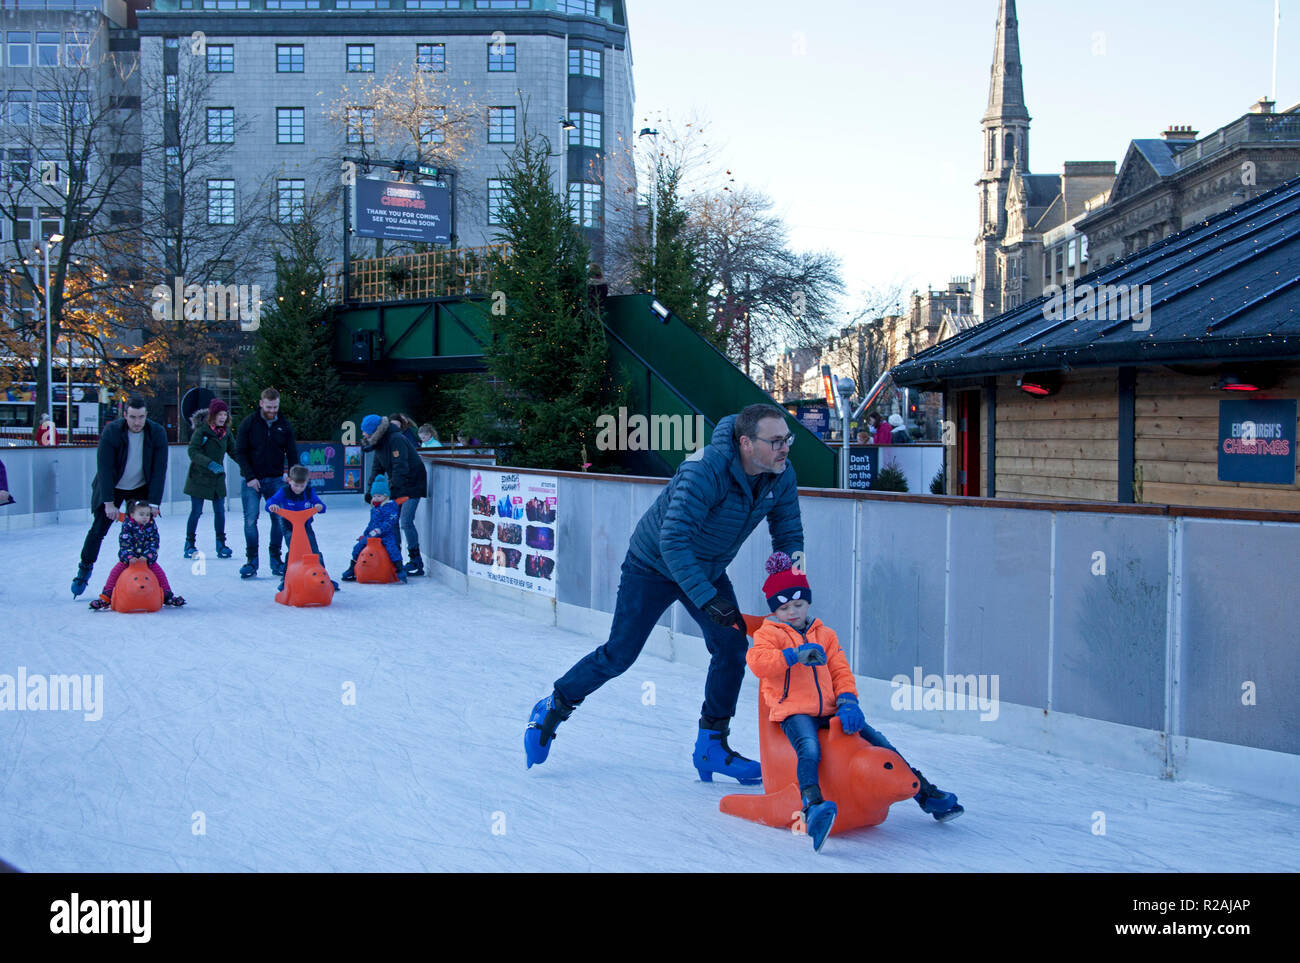 Edinburgh, Scotland. UK 18 Nov. 2018. the sunshine got people out to visit the  St Andrew's Square ice rink which had a slowish start but began to busy up for the afternoon. Stock Photo